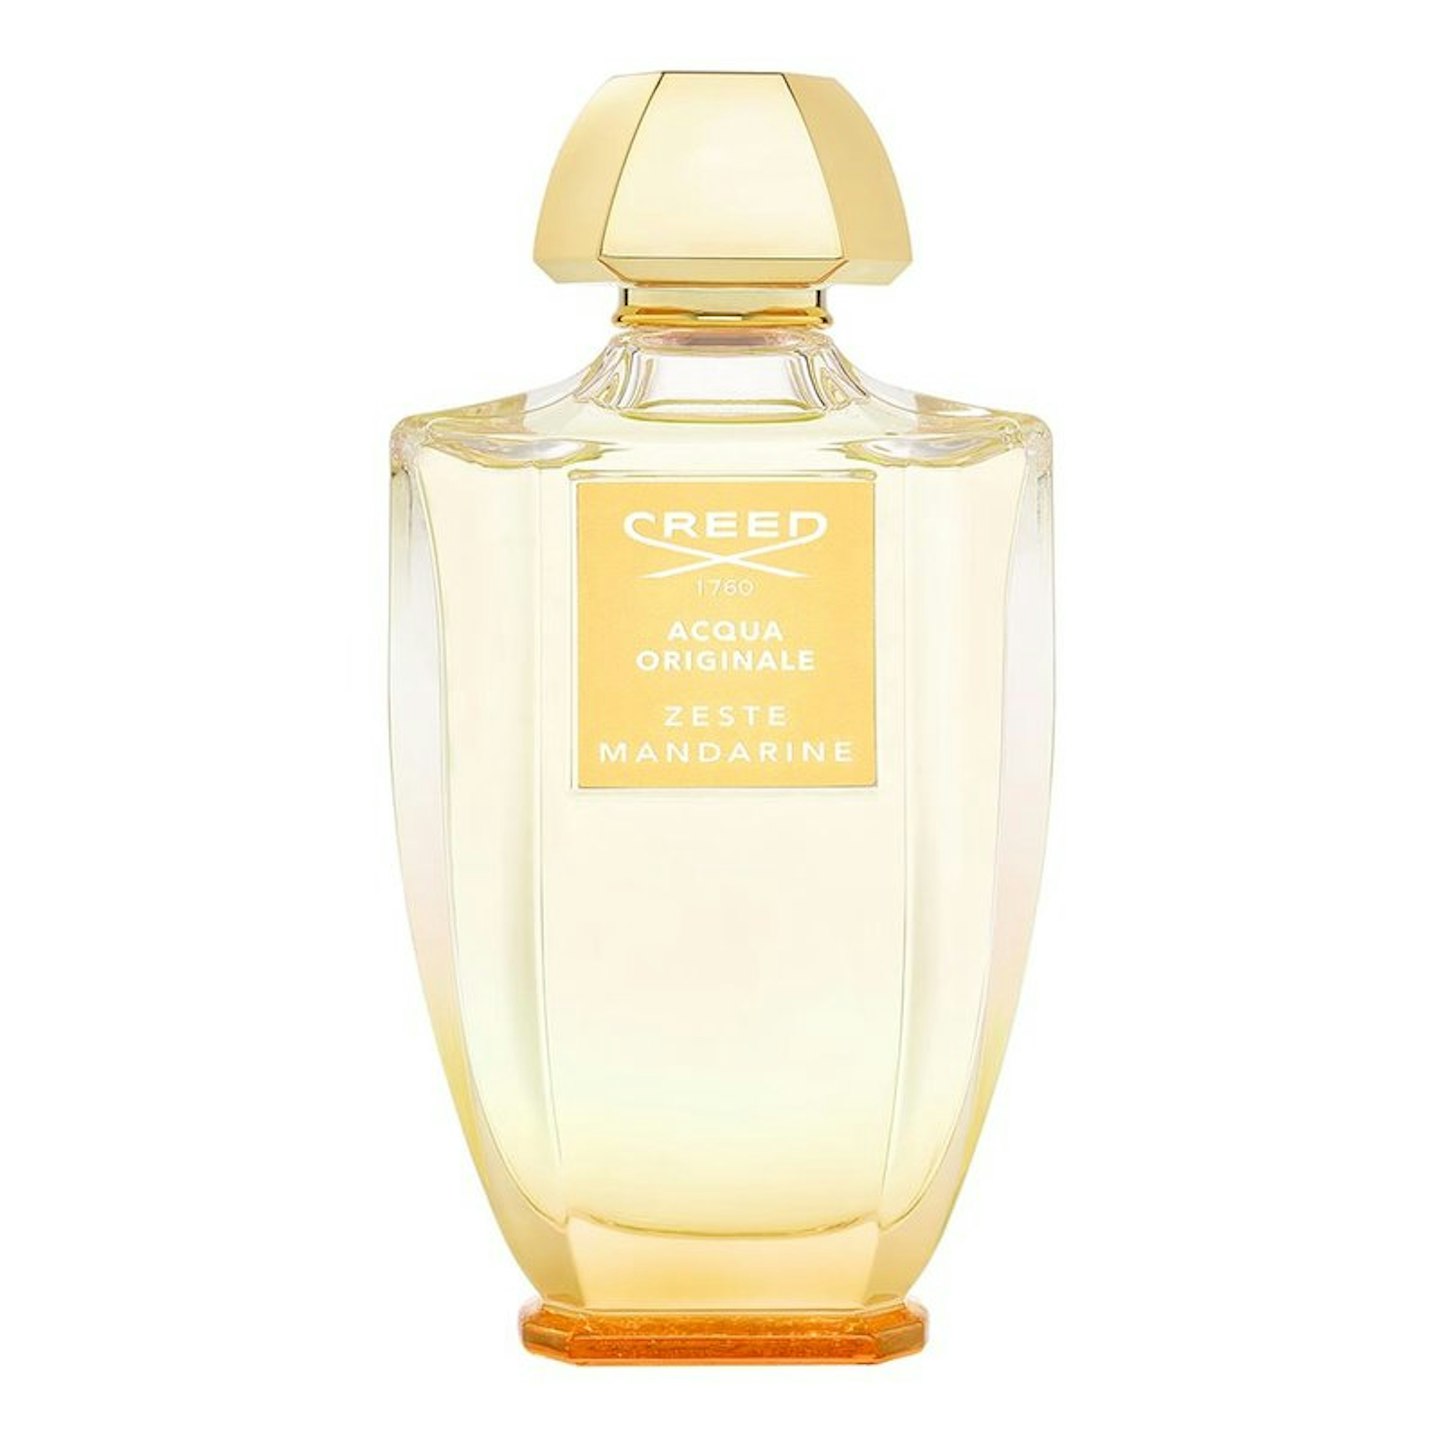 Best Summer Fragrance - Creed